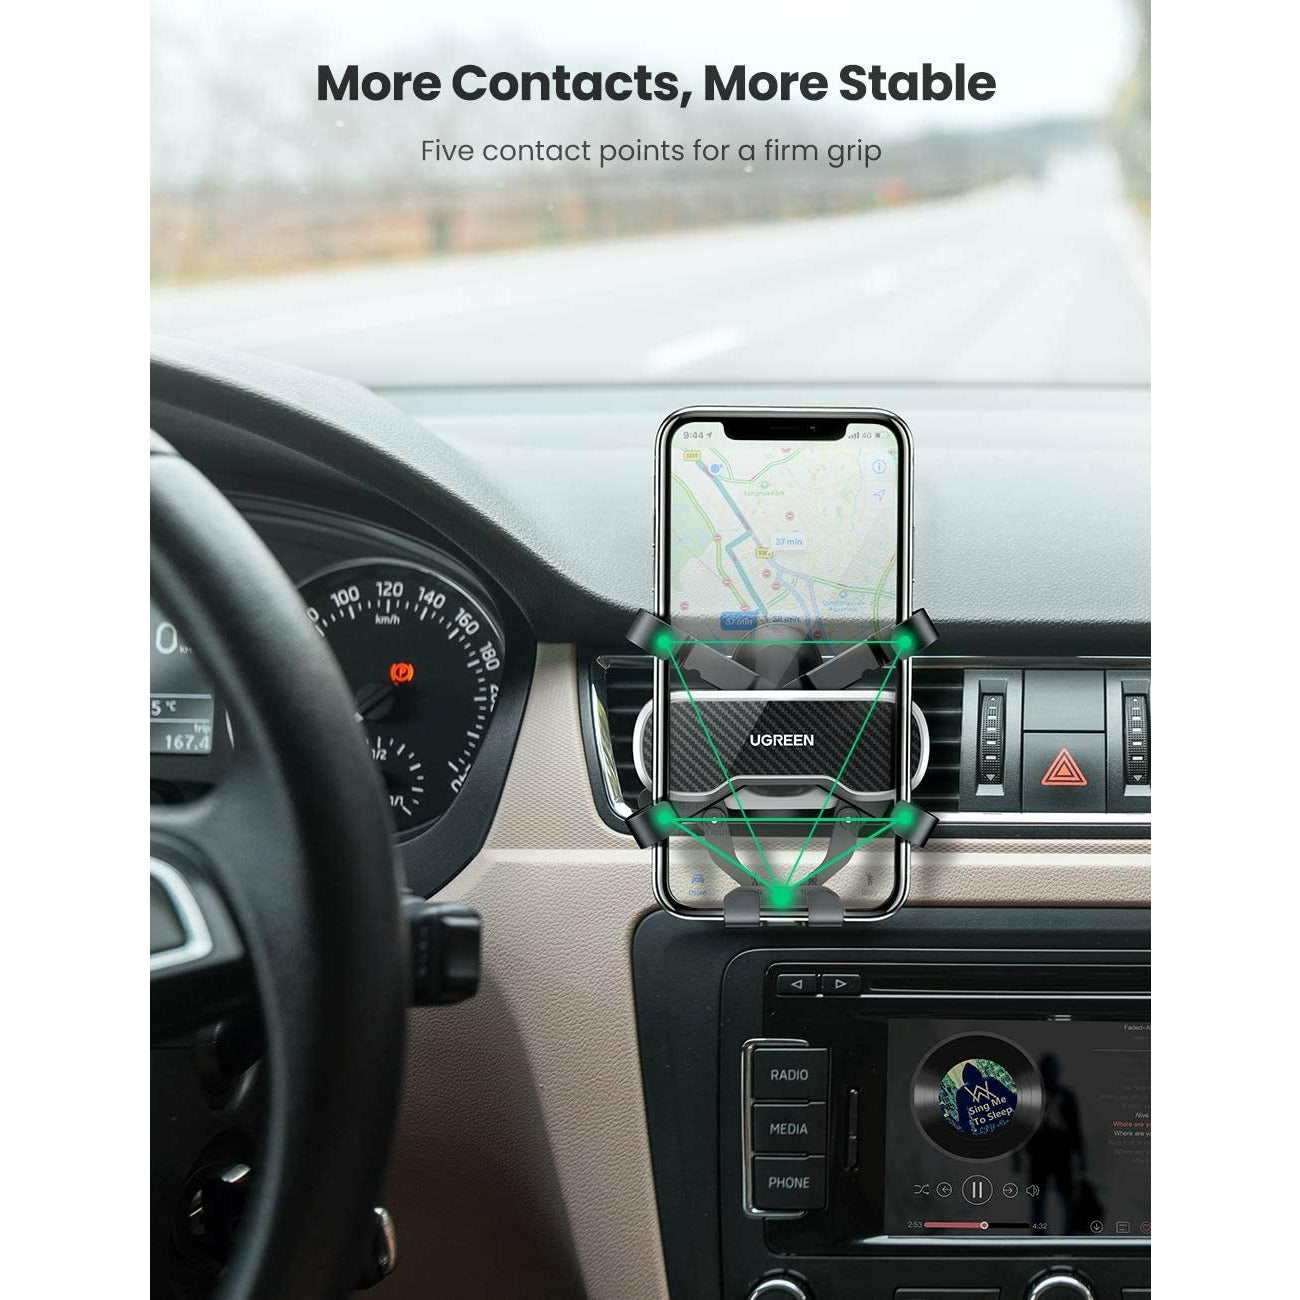 UGREEN 80871 Gravity Phone Holder for car with Hook